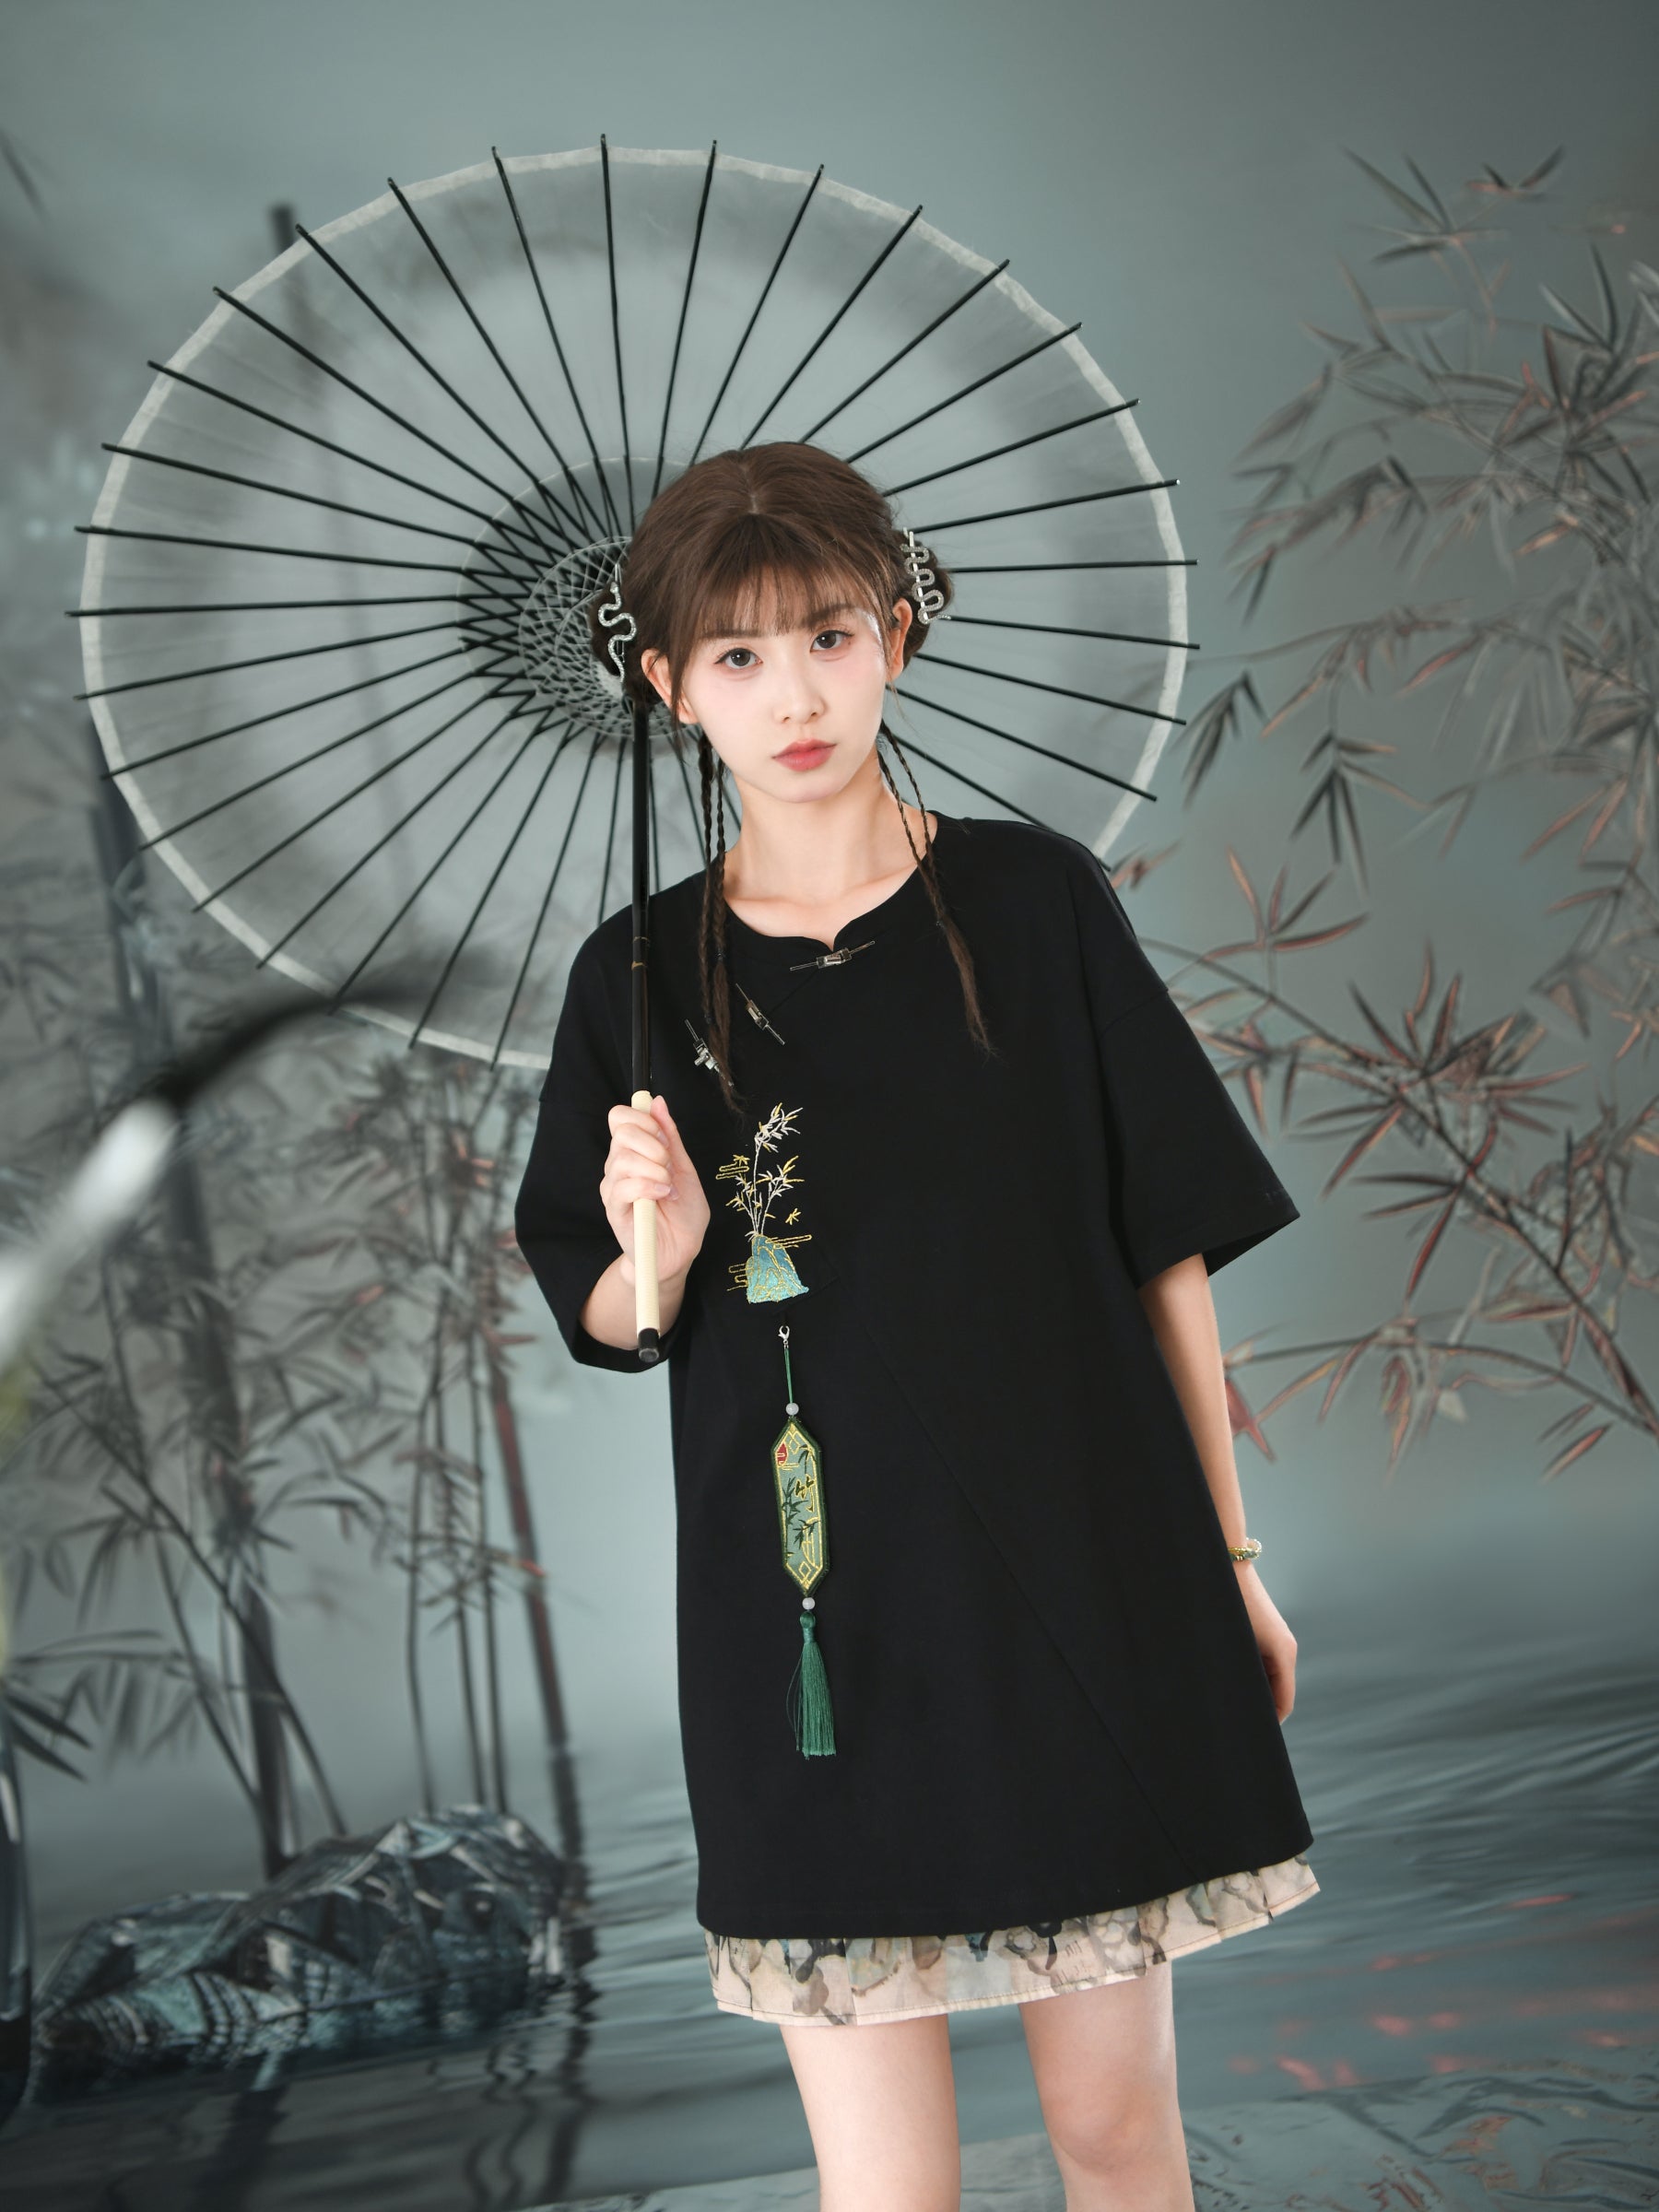 Bamboo Shadow Chinese Style Short Sleeve Tee-ntbhshop